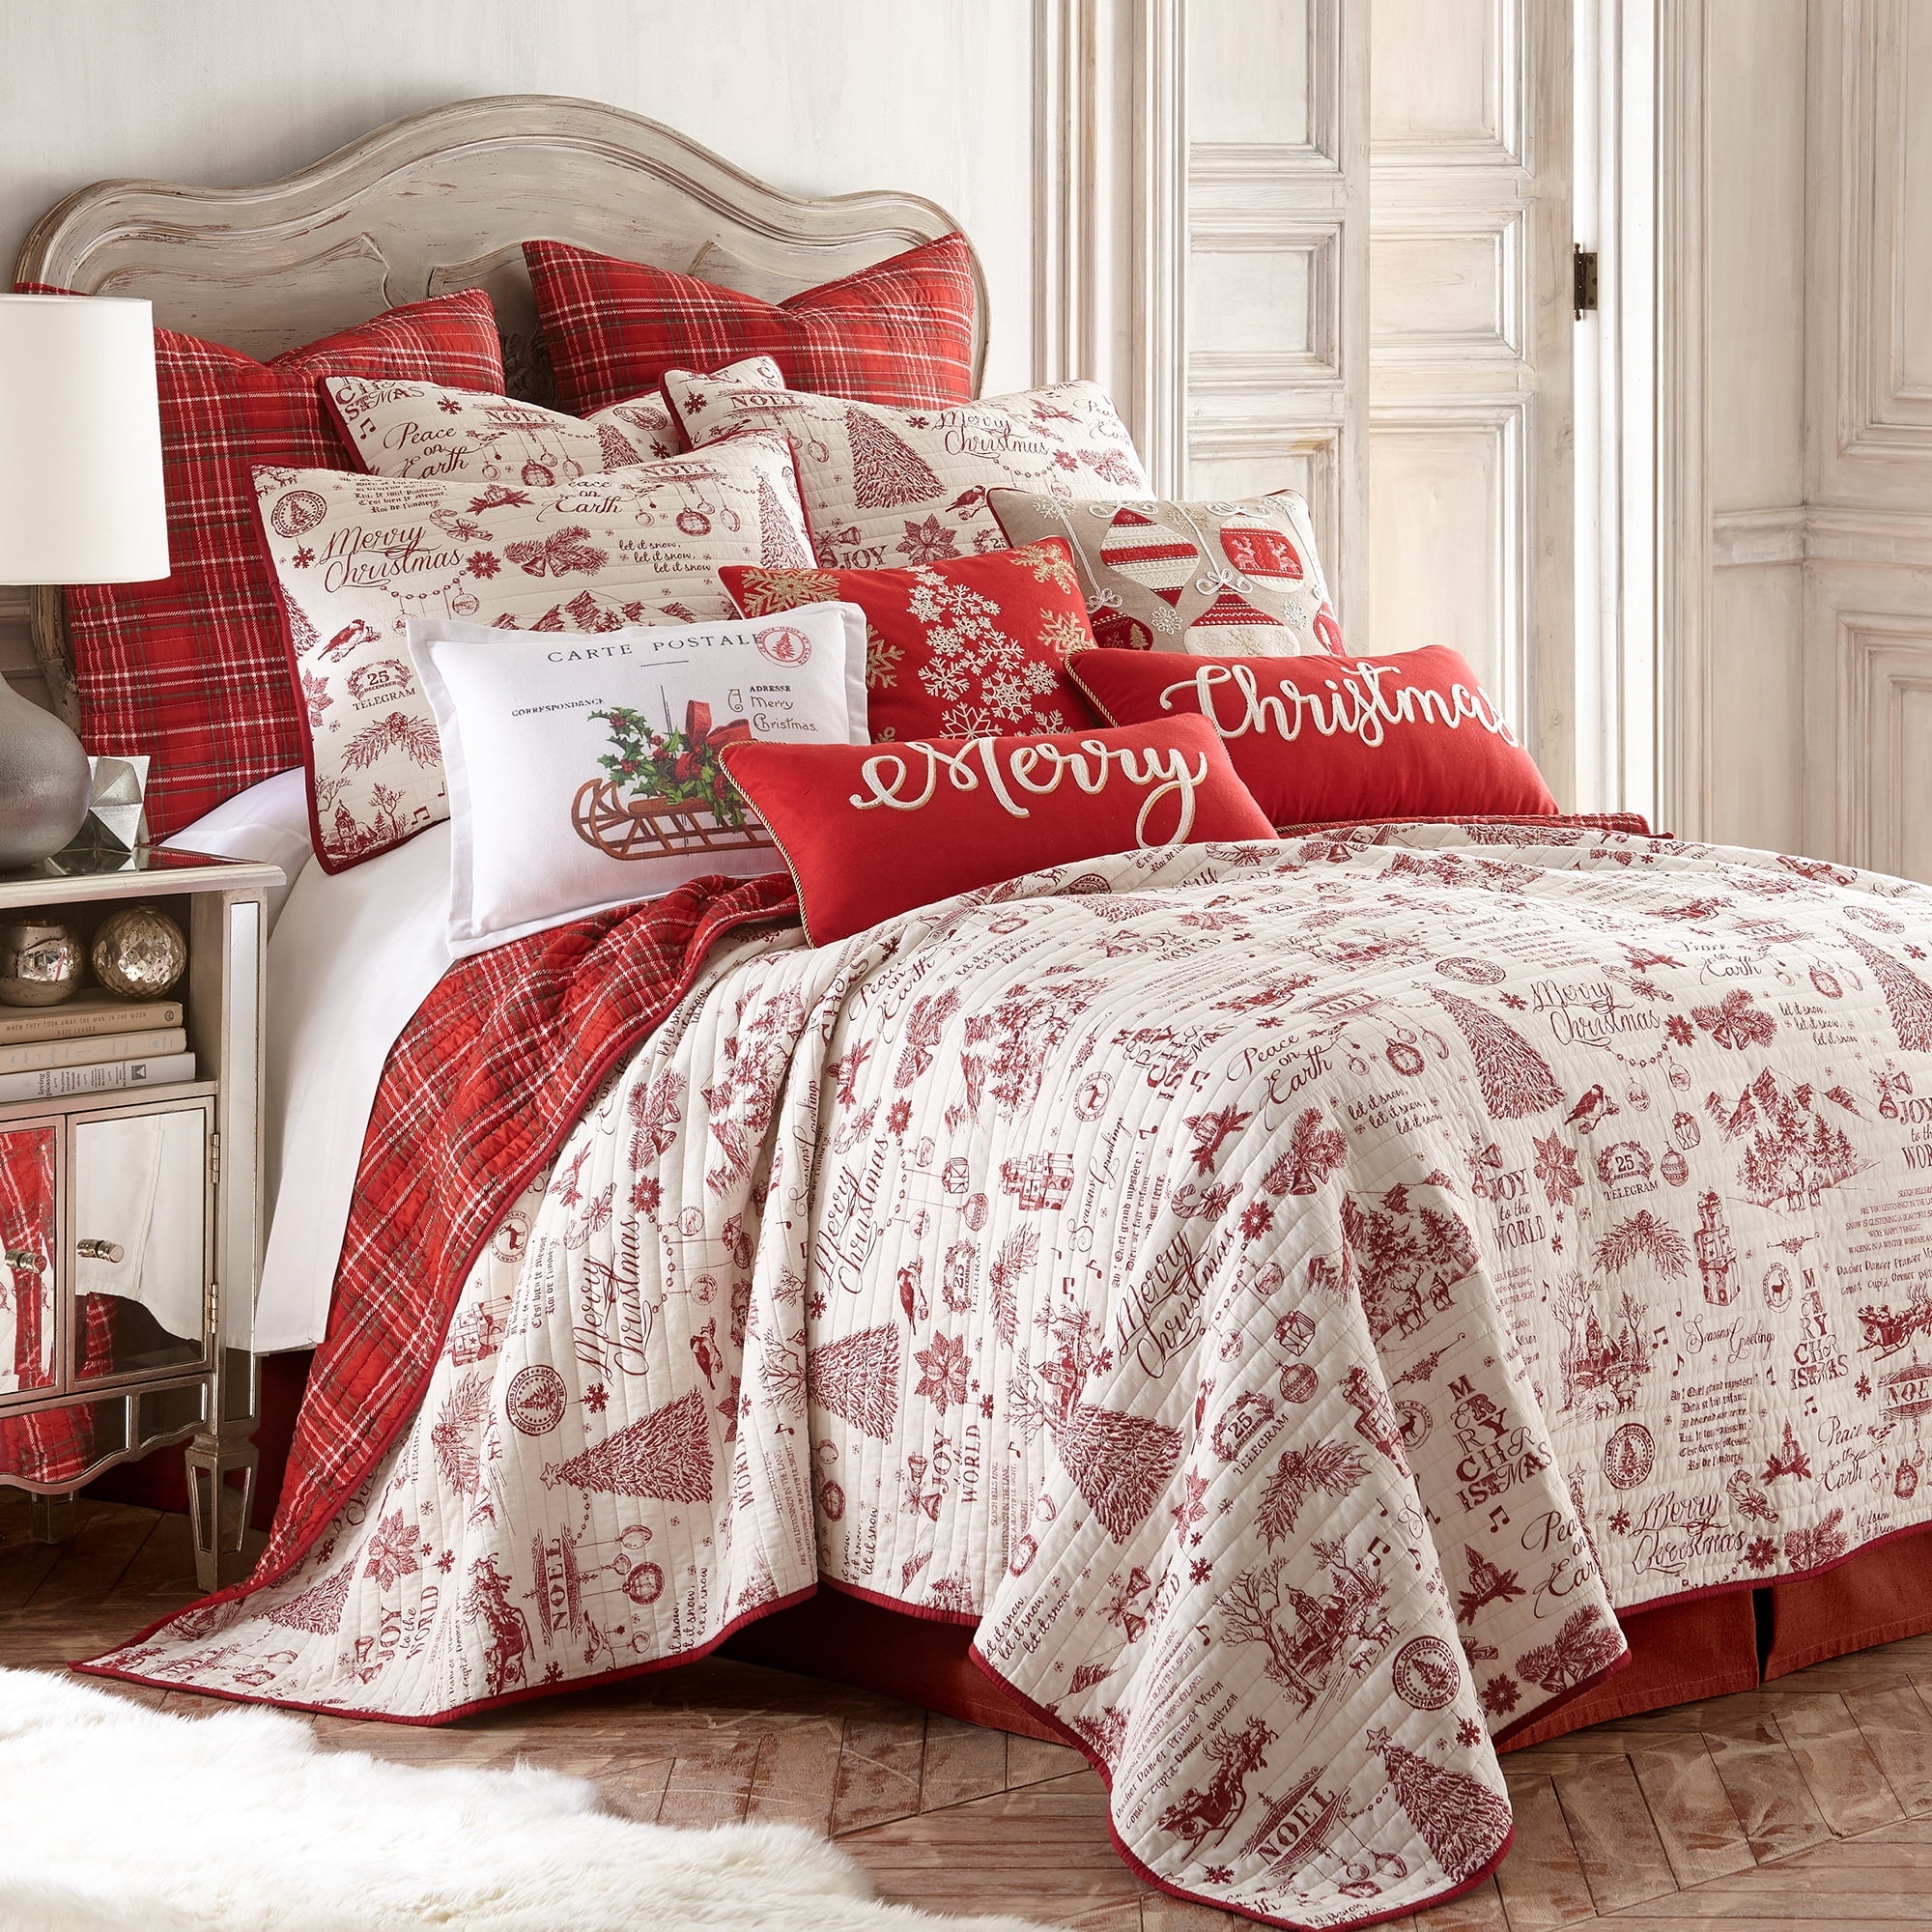 Details about   Gray Queen Comforter Set Reversible Plaid Deer 2 Shams Stain/Wrinkle Resistant 